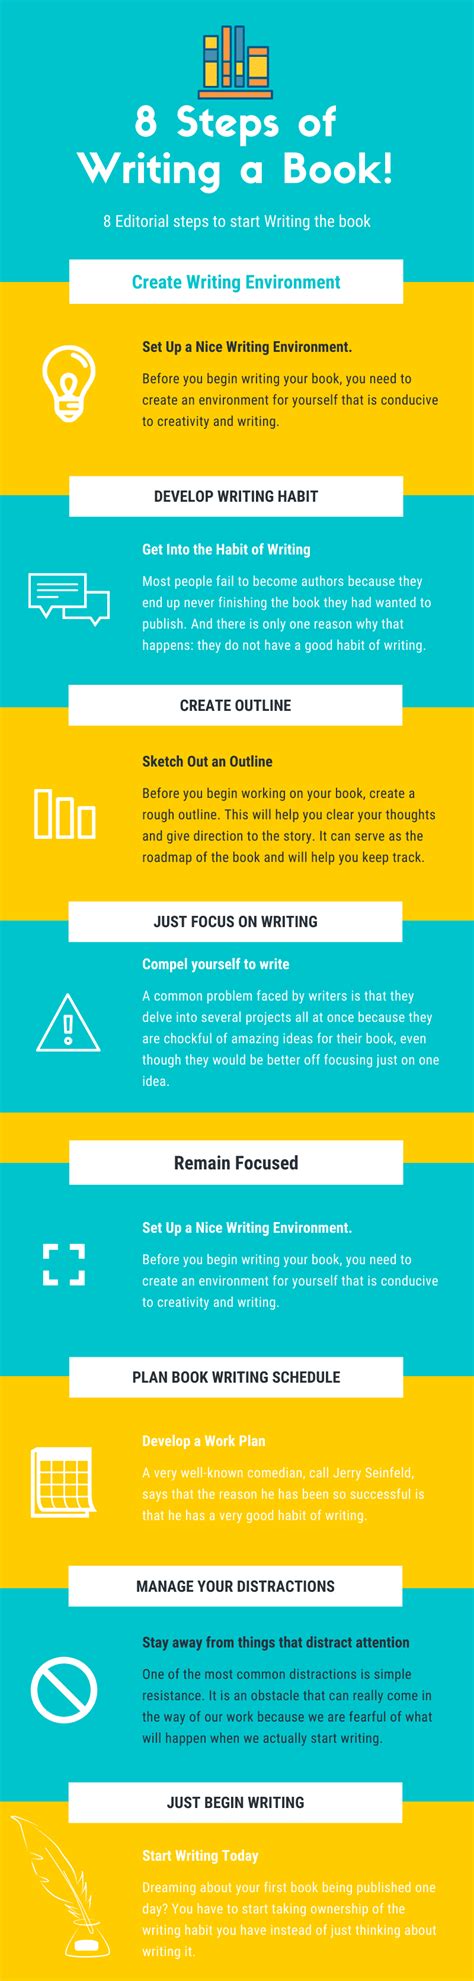 How To Start Writing A Book In 2021 Pen Down A Book In 8 Simple Steps